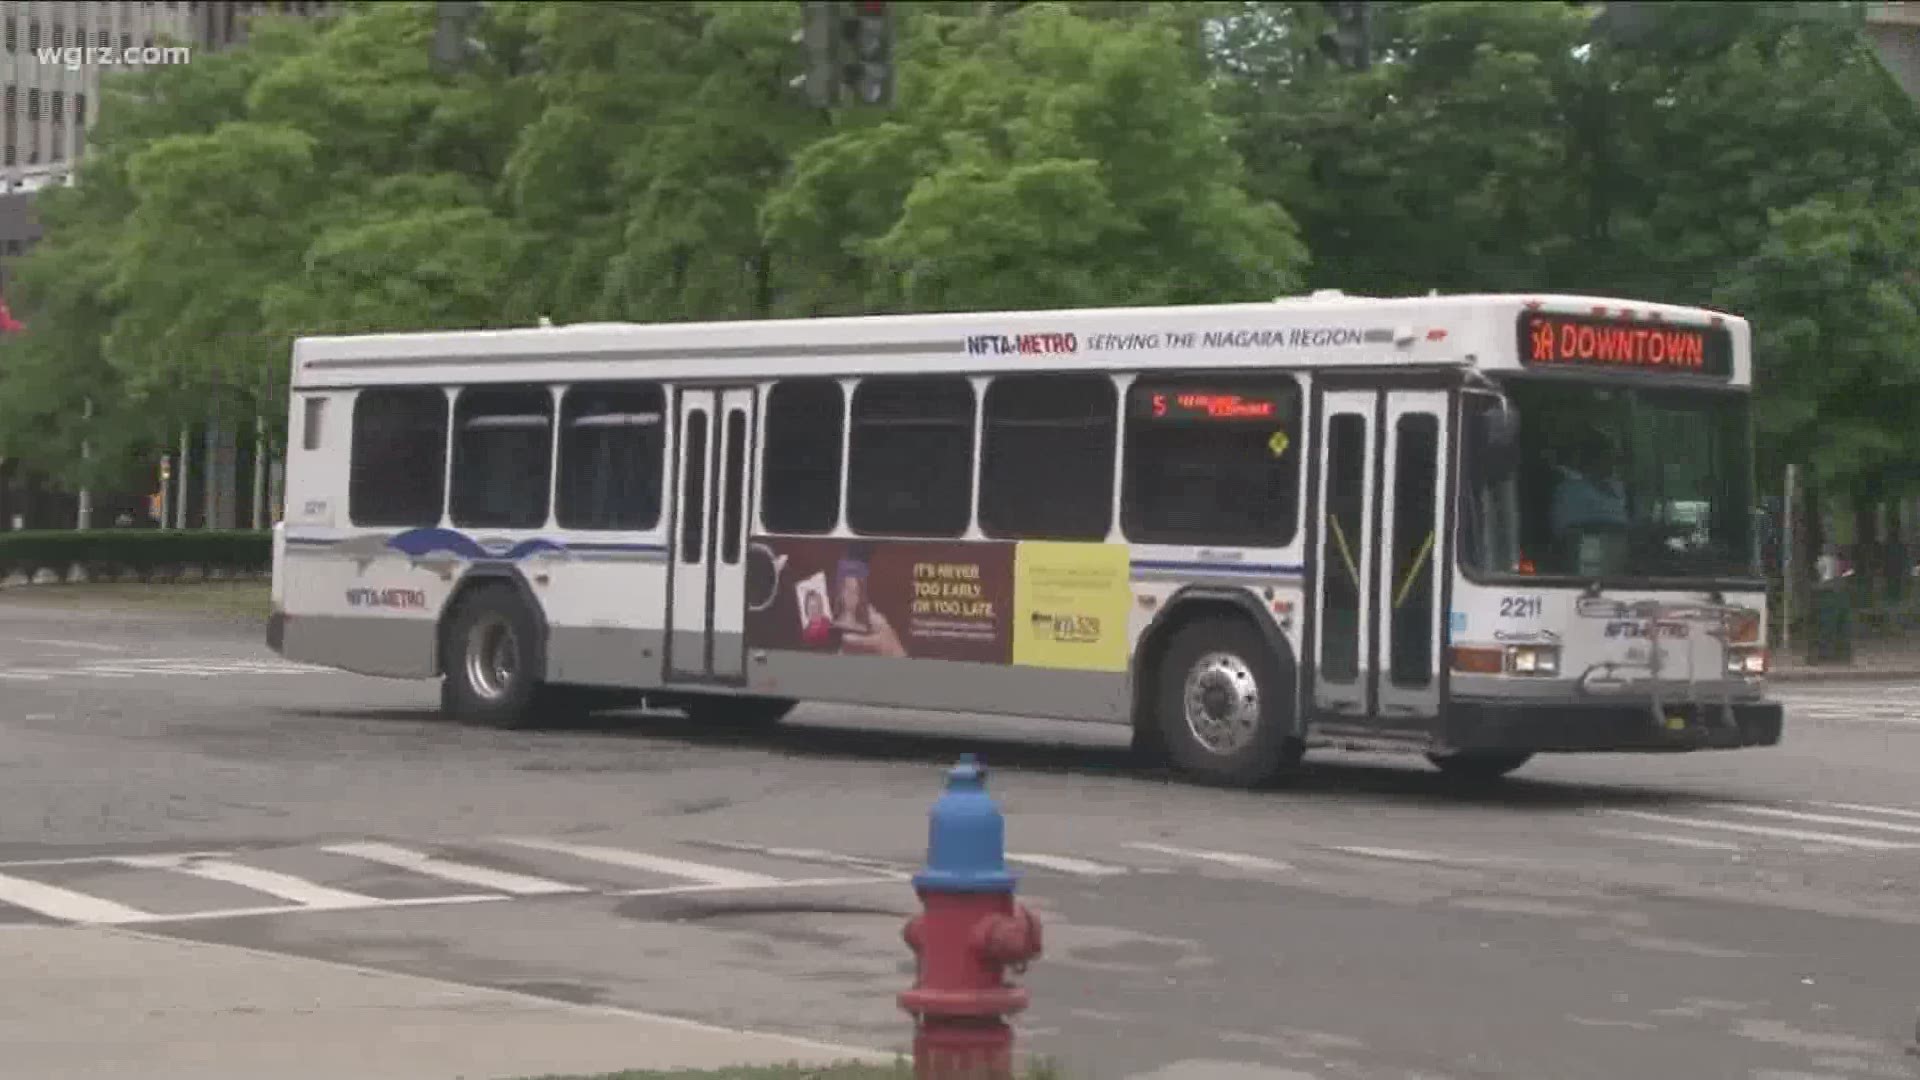 The NFTA is going to be collecting fares tomorrow... after suspending it for three months to keep contact between drivers and riders to a minimum.